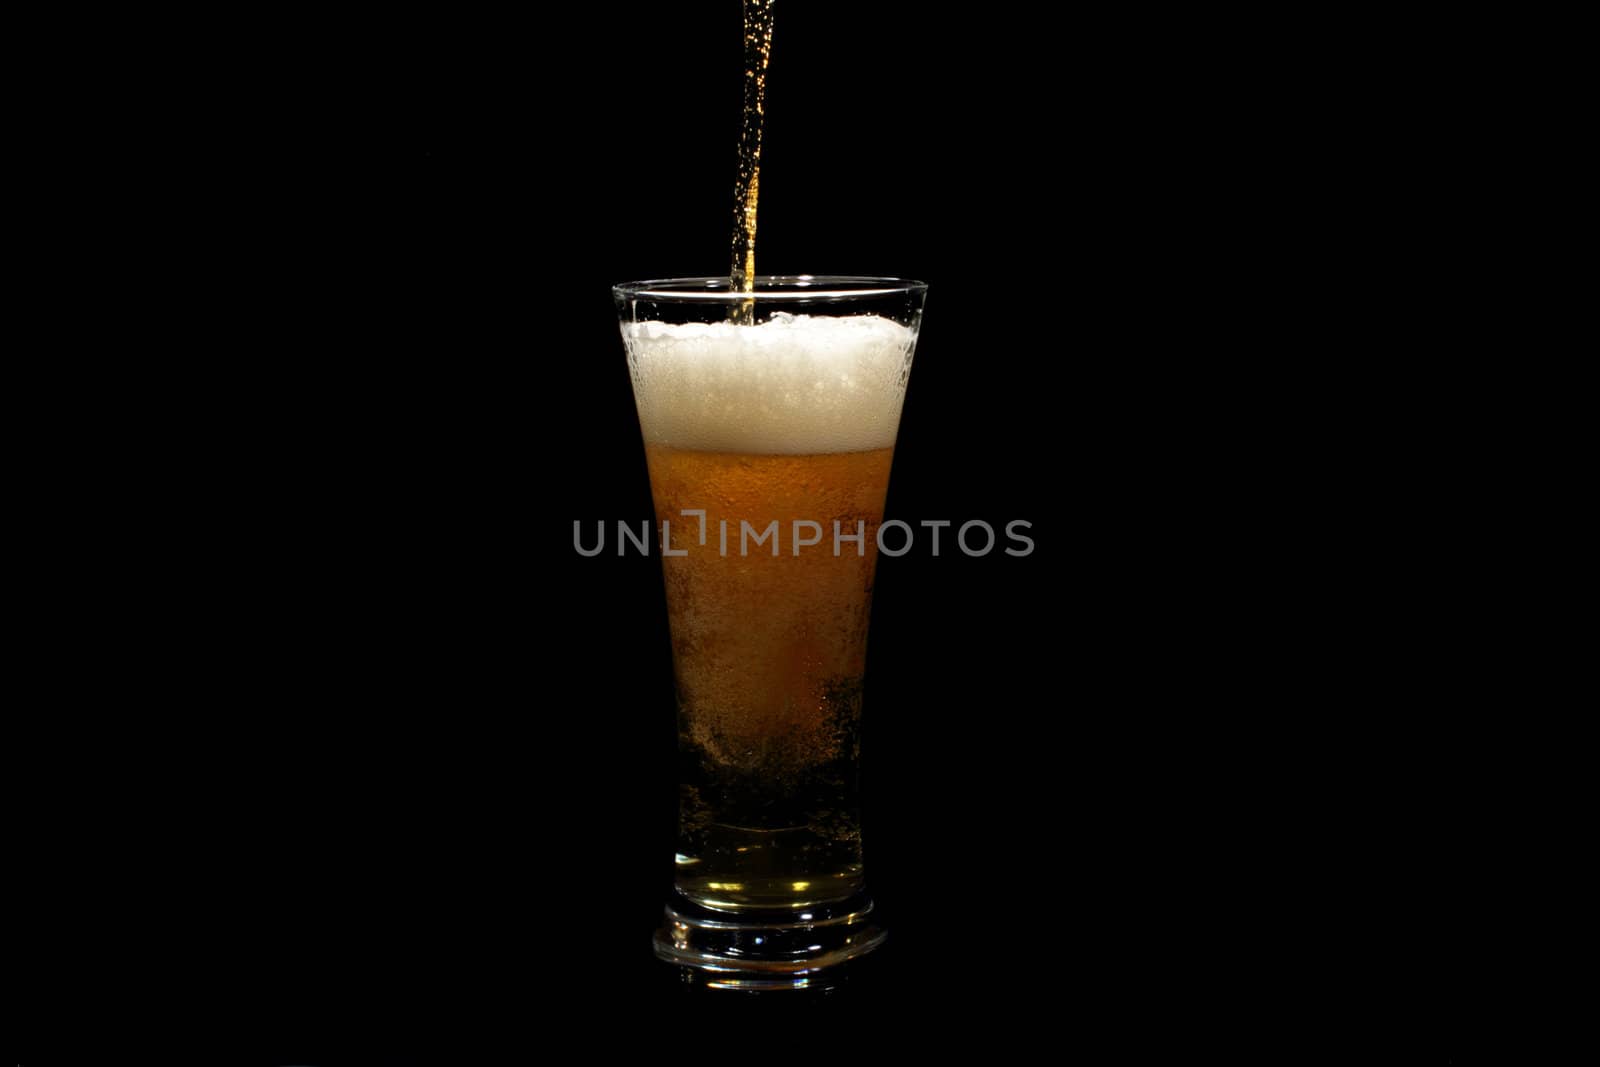 Beer pouring into a glass by devy